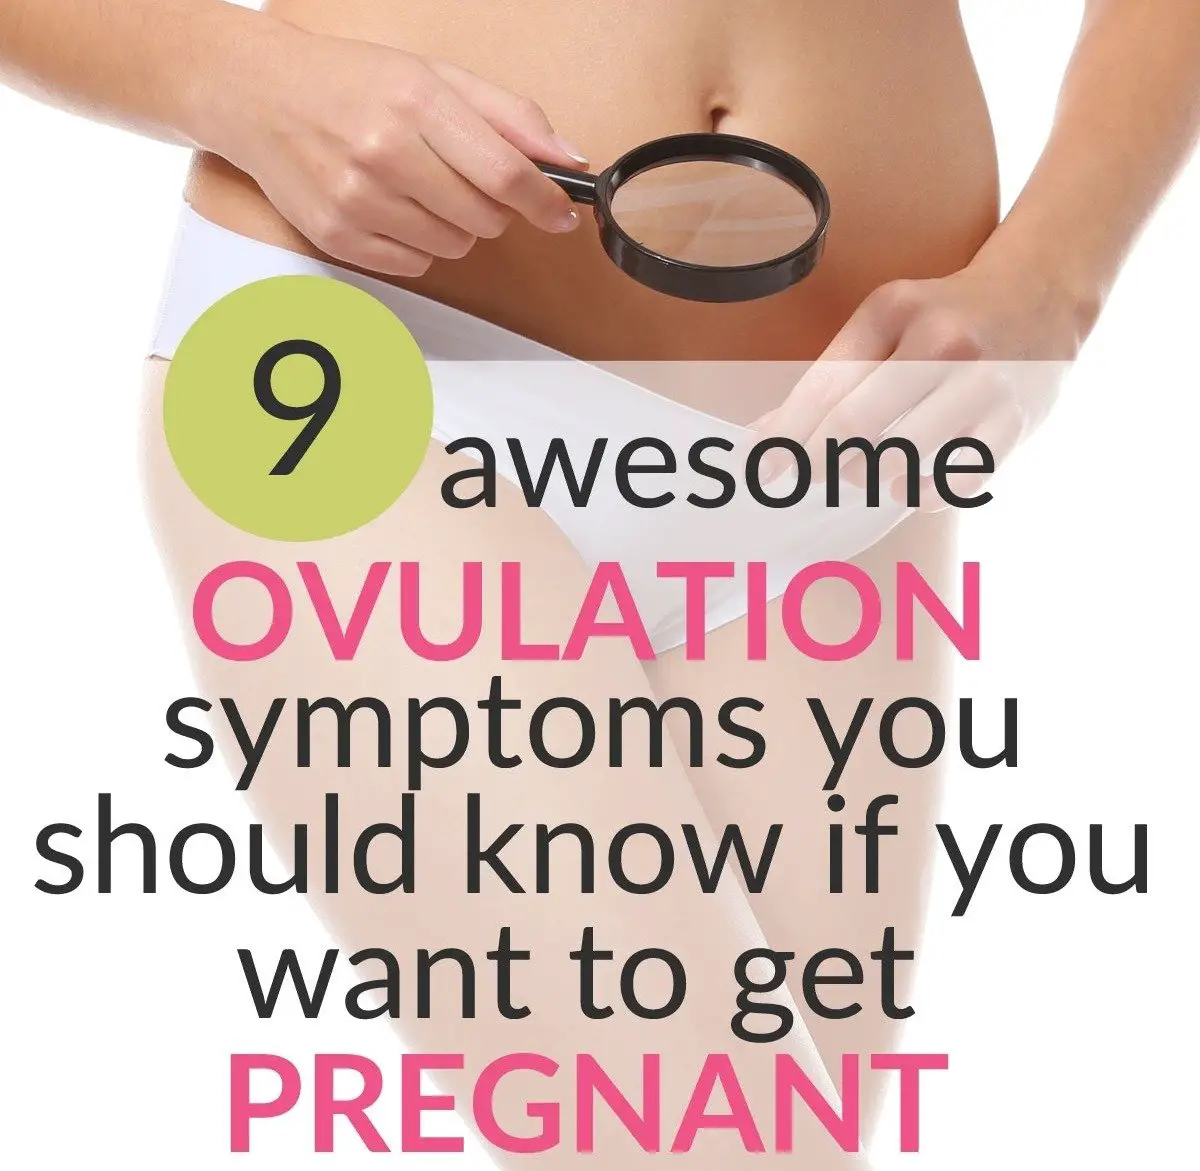 9 Awesome Ovulation Symptoms You Should Know If Your Want to Get ...